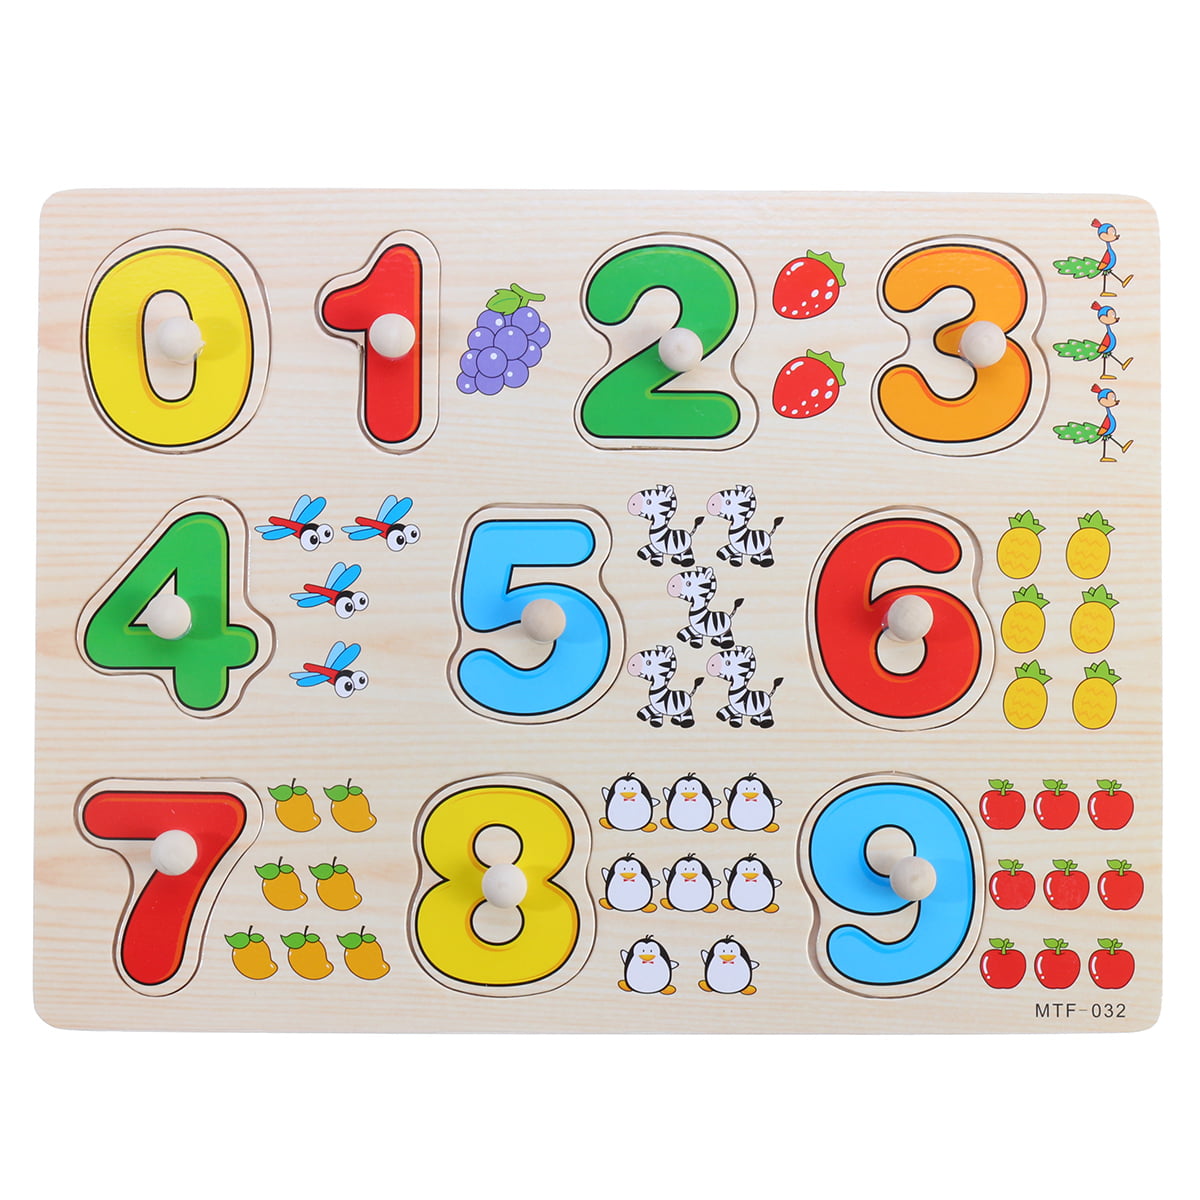 Wooden Numbers & Letters Shaped Peg Puzzles Kids Toddlers Educational Toy